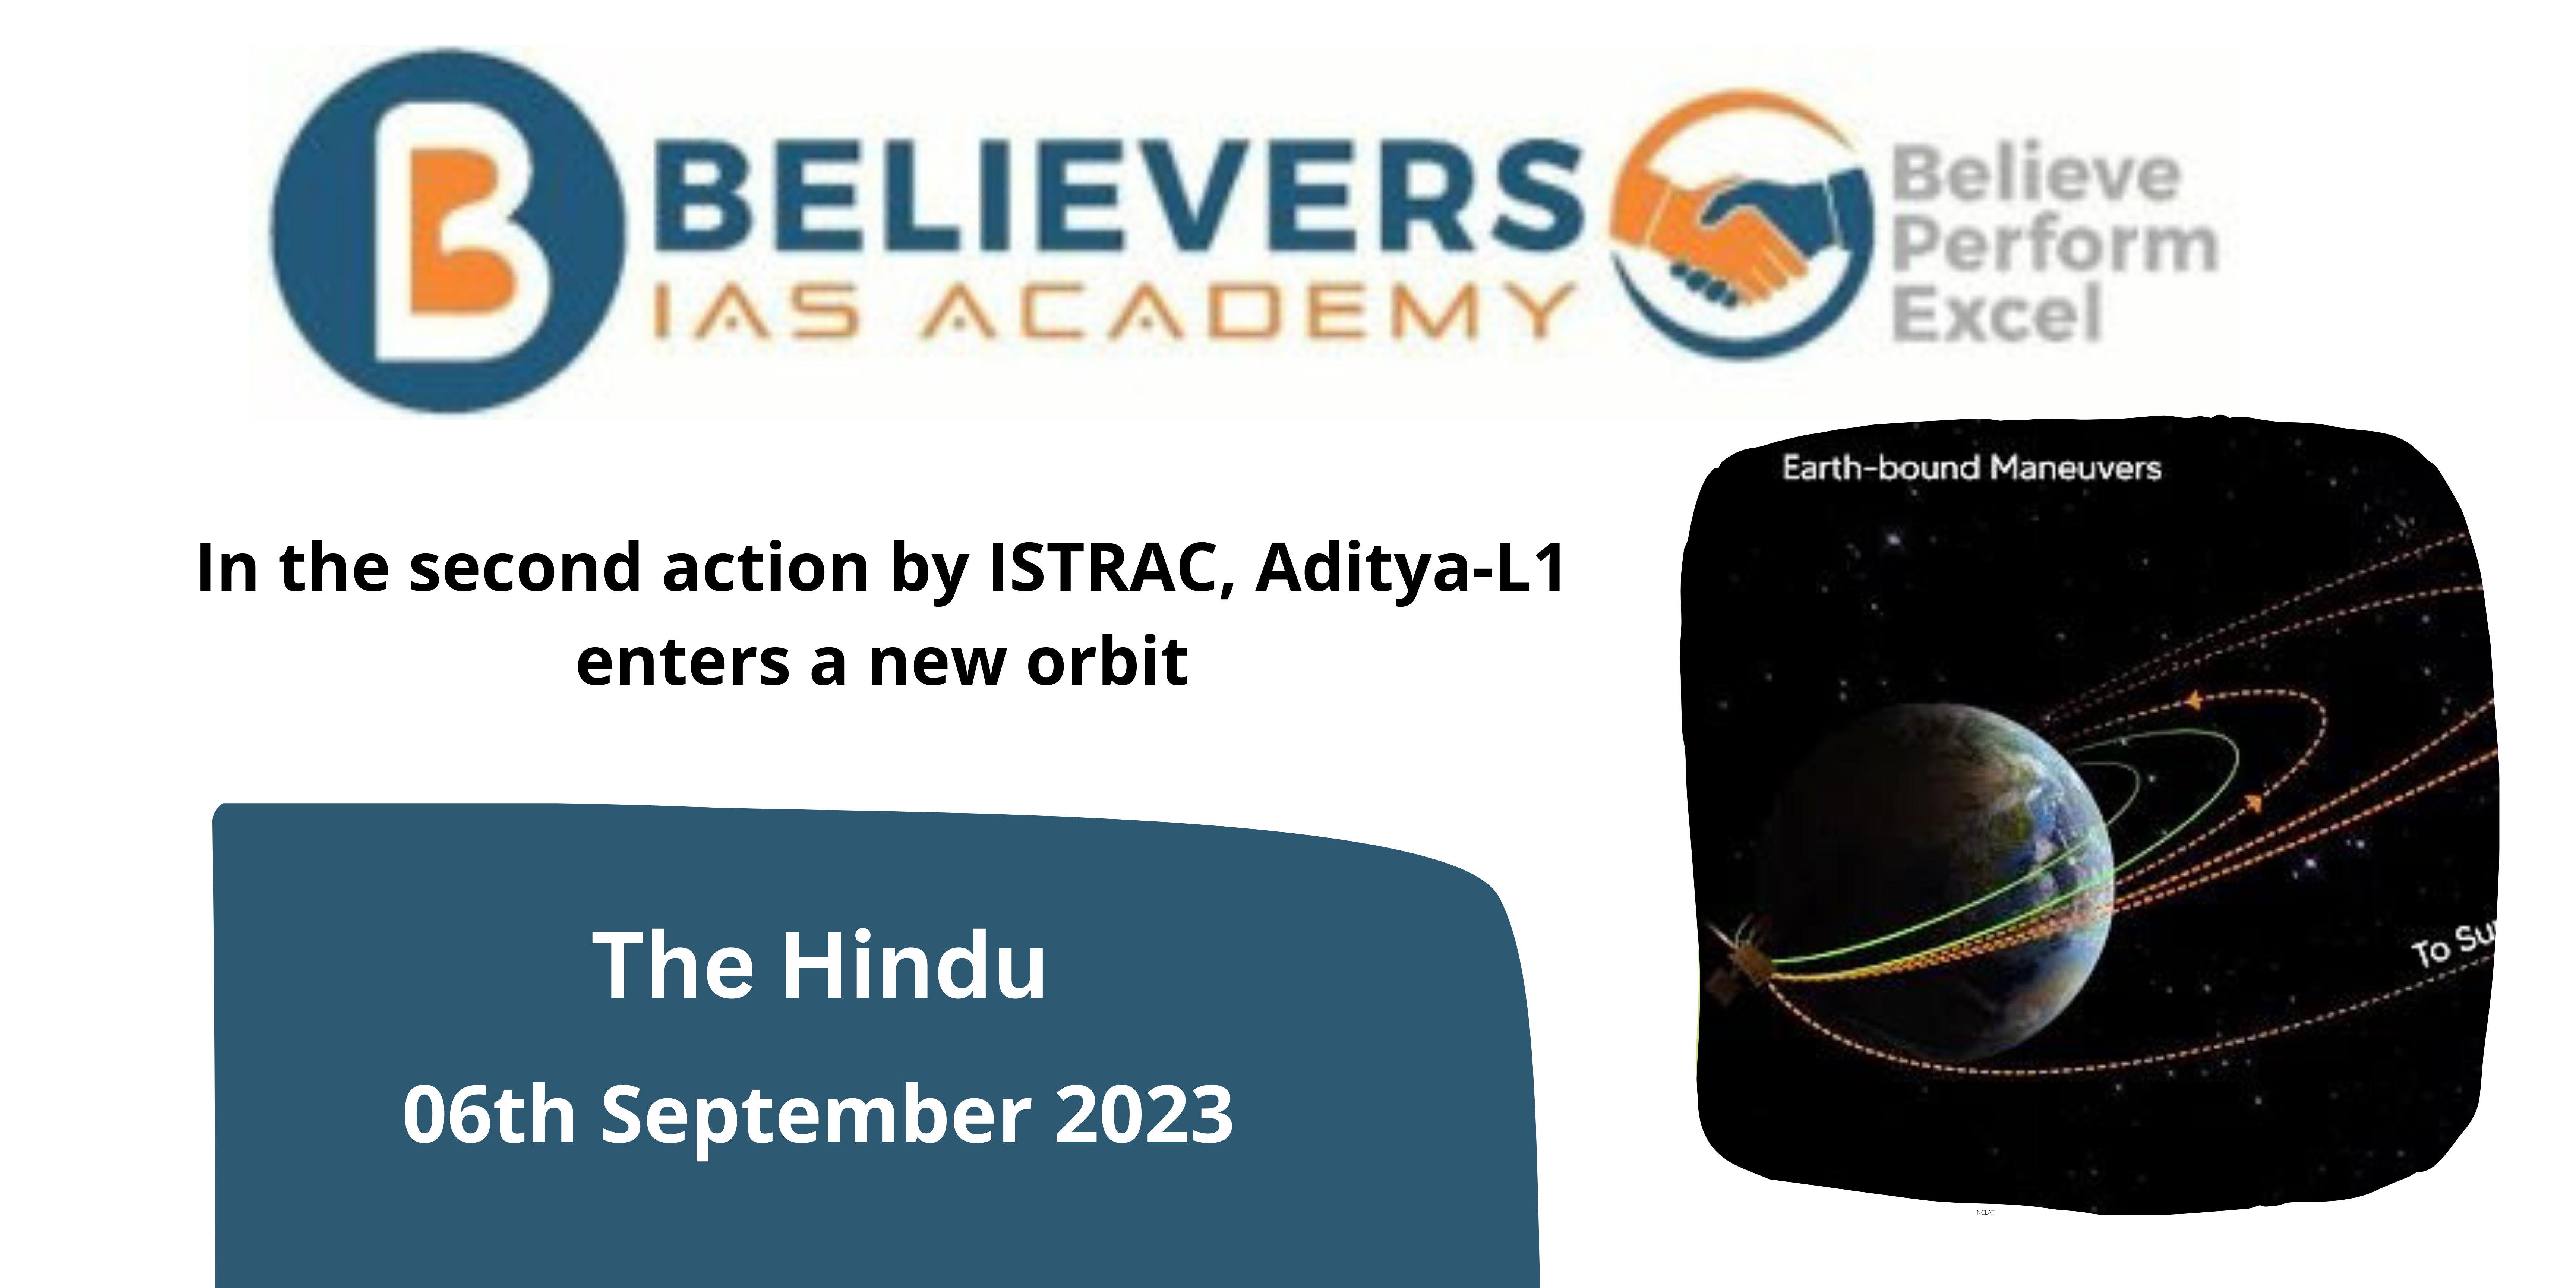 In the second action by ISTRAC, Aditya-L1 enters a new orbit